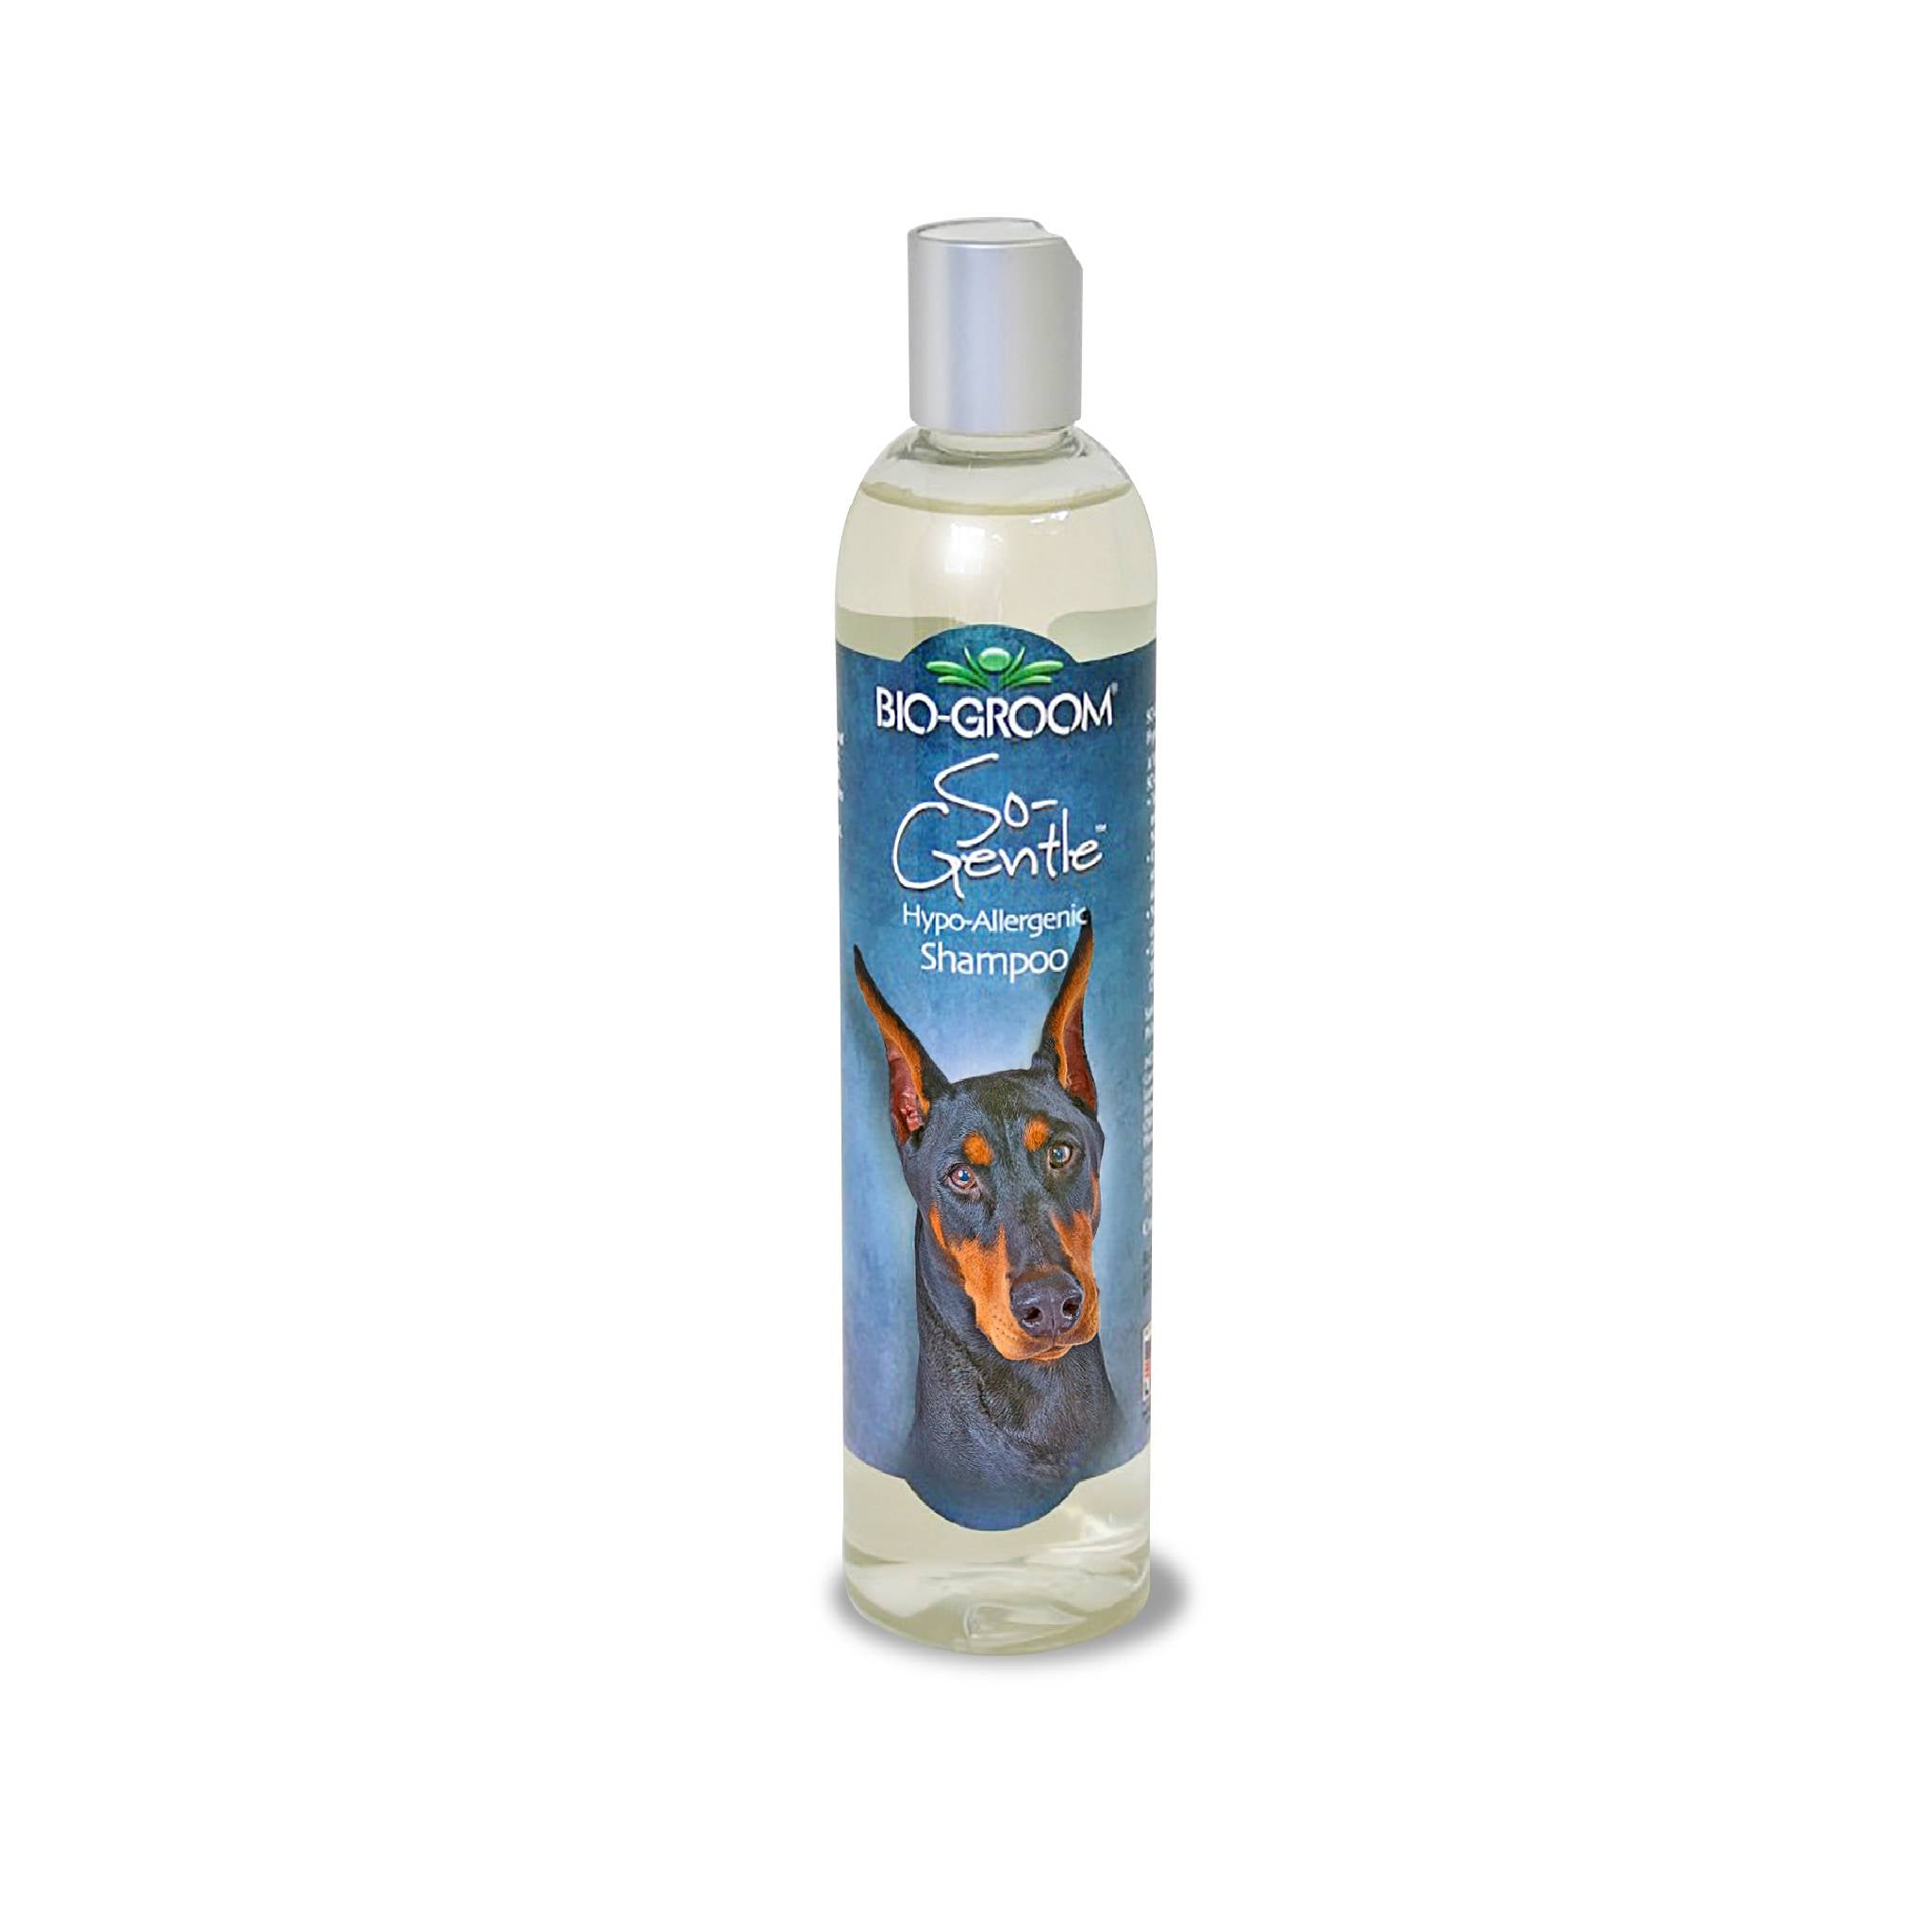 Bio-Groom So Gentle Hypo-Allergenic Pet Shampoo For Cats and Dogs, 355 ML